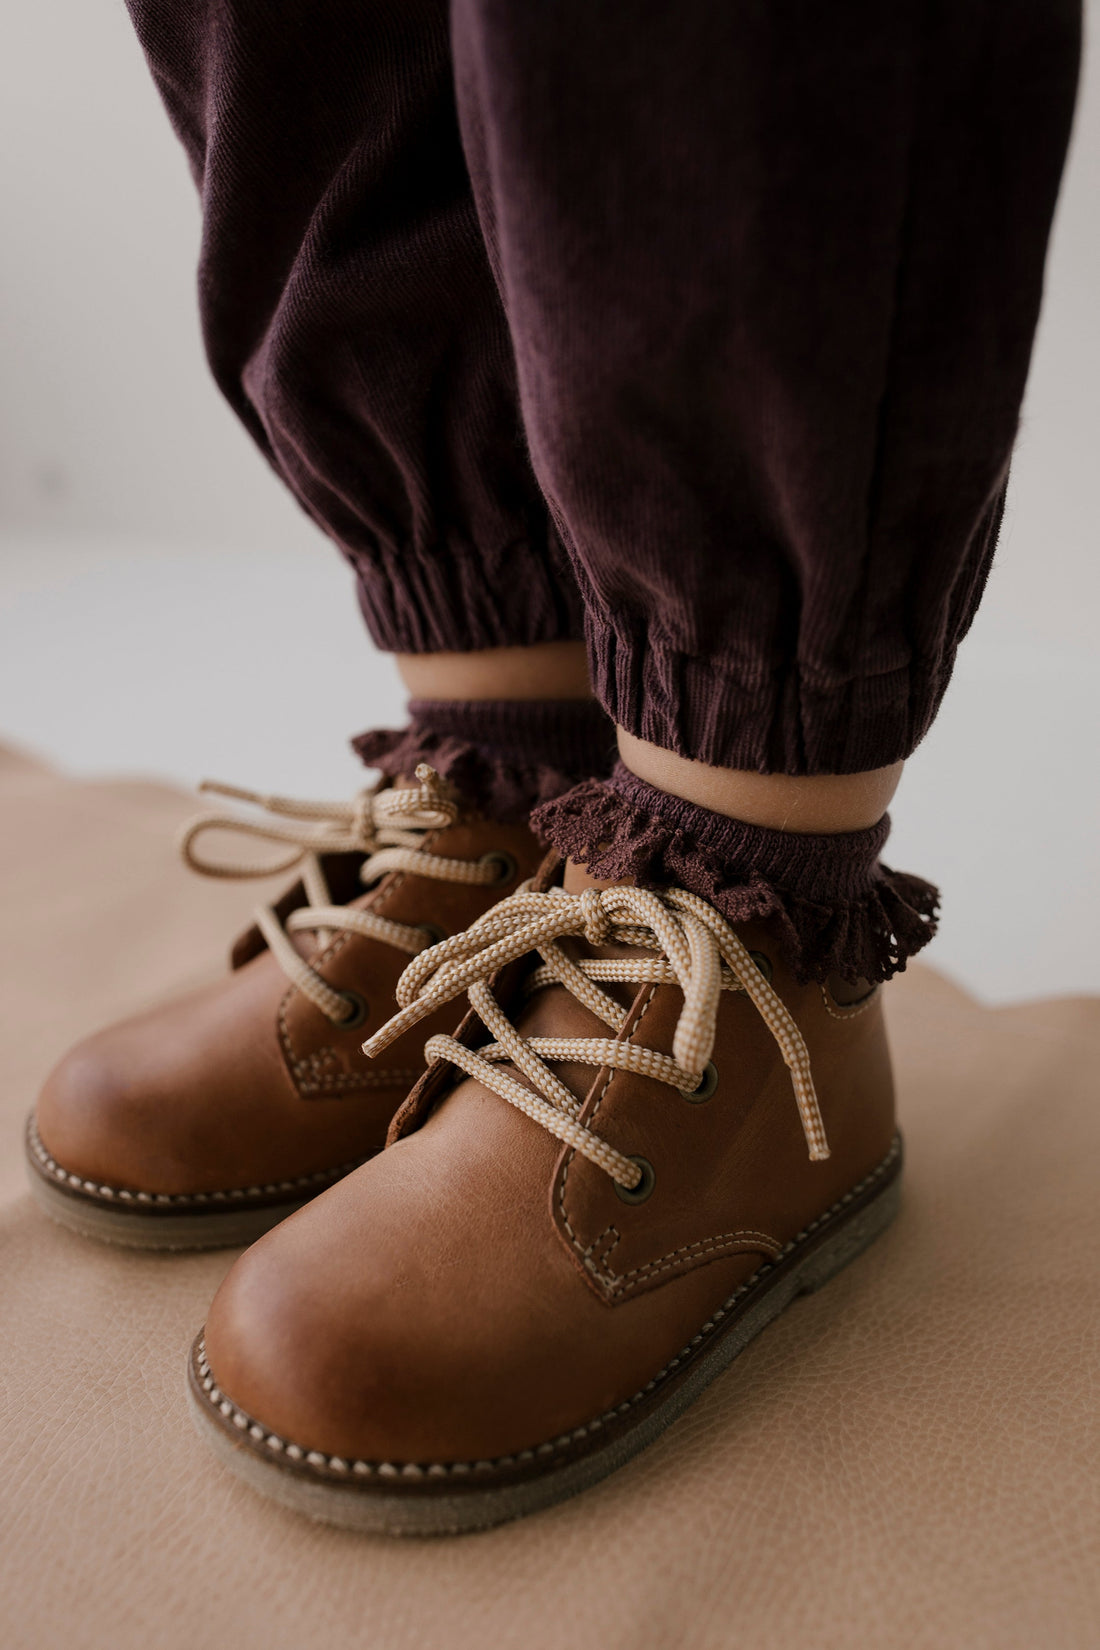 Leather Boot - Tan Childrens Footwear from Jamie Kay NZ